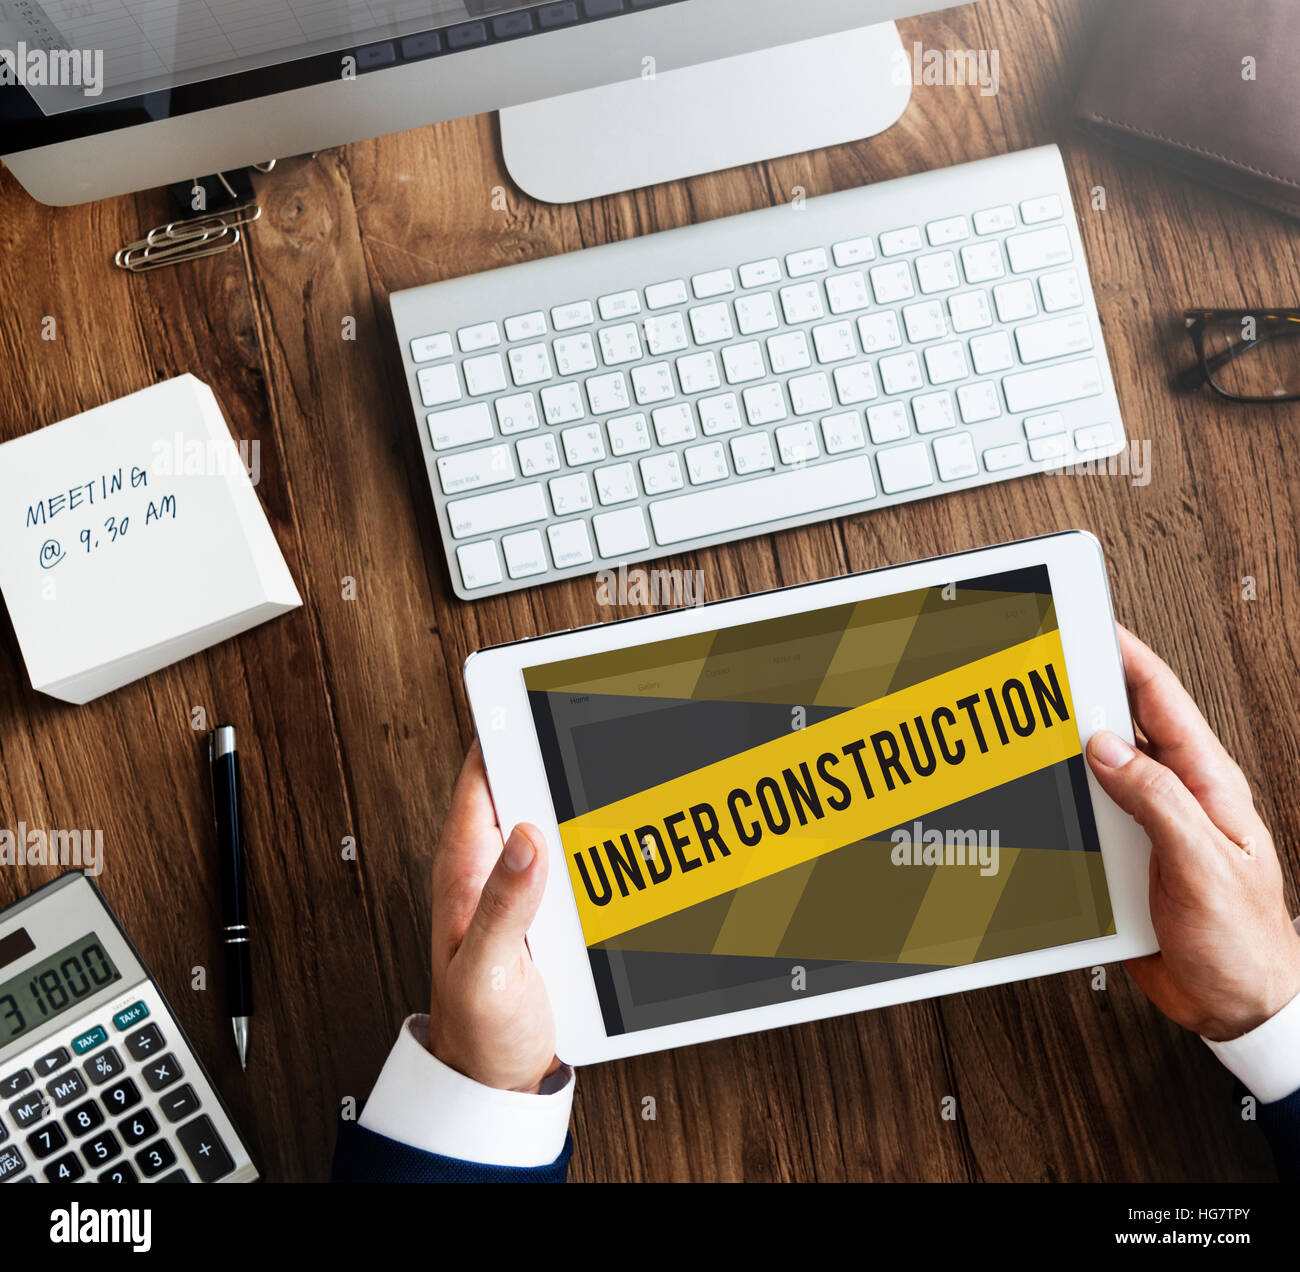 Under Construction Alert Safety Warning Privacy Concept Stock Photo